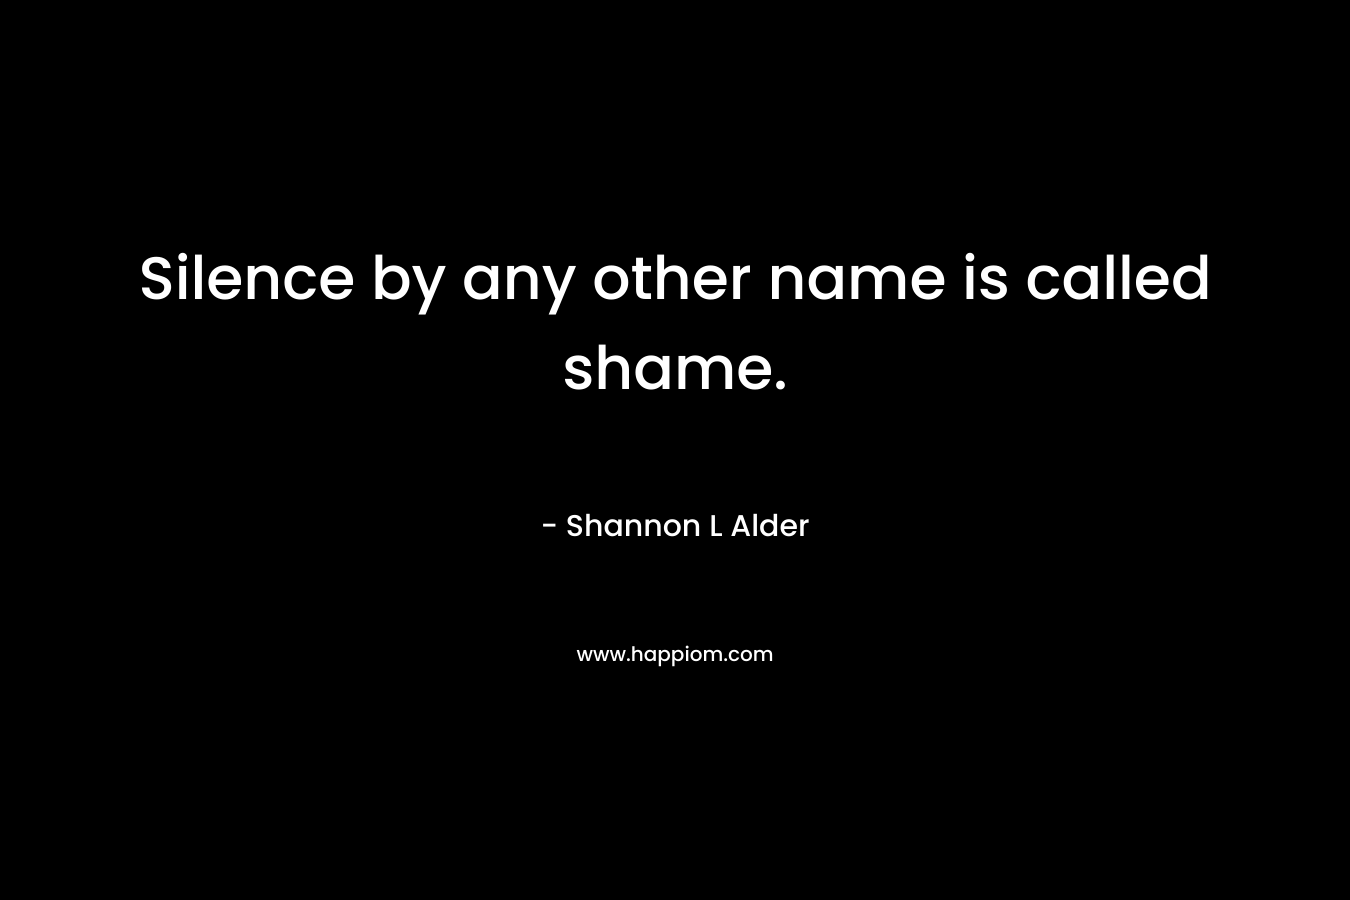 Silence by any other name is called shame.